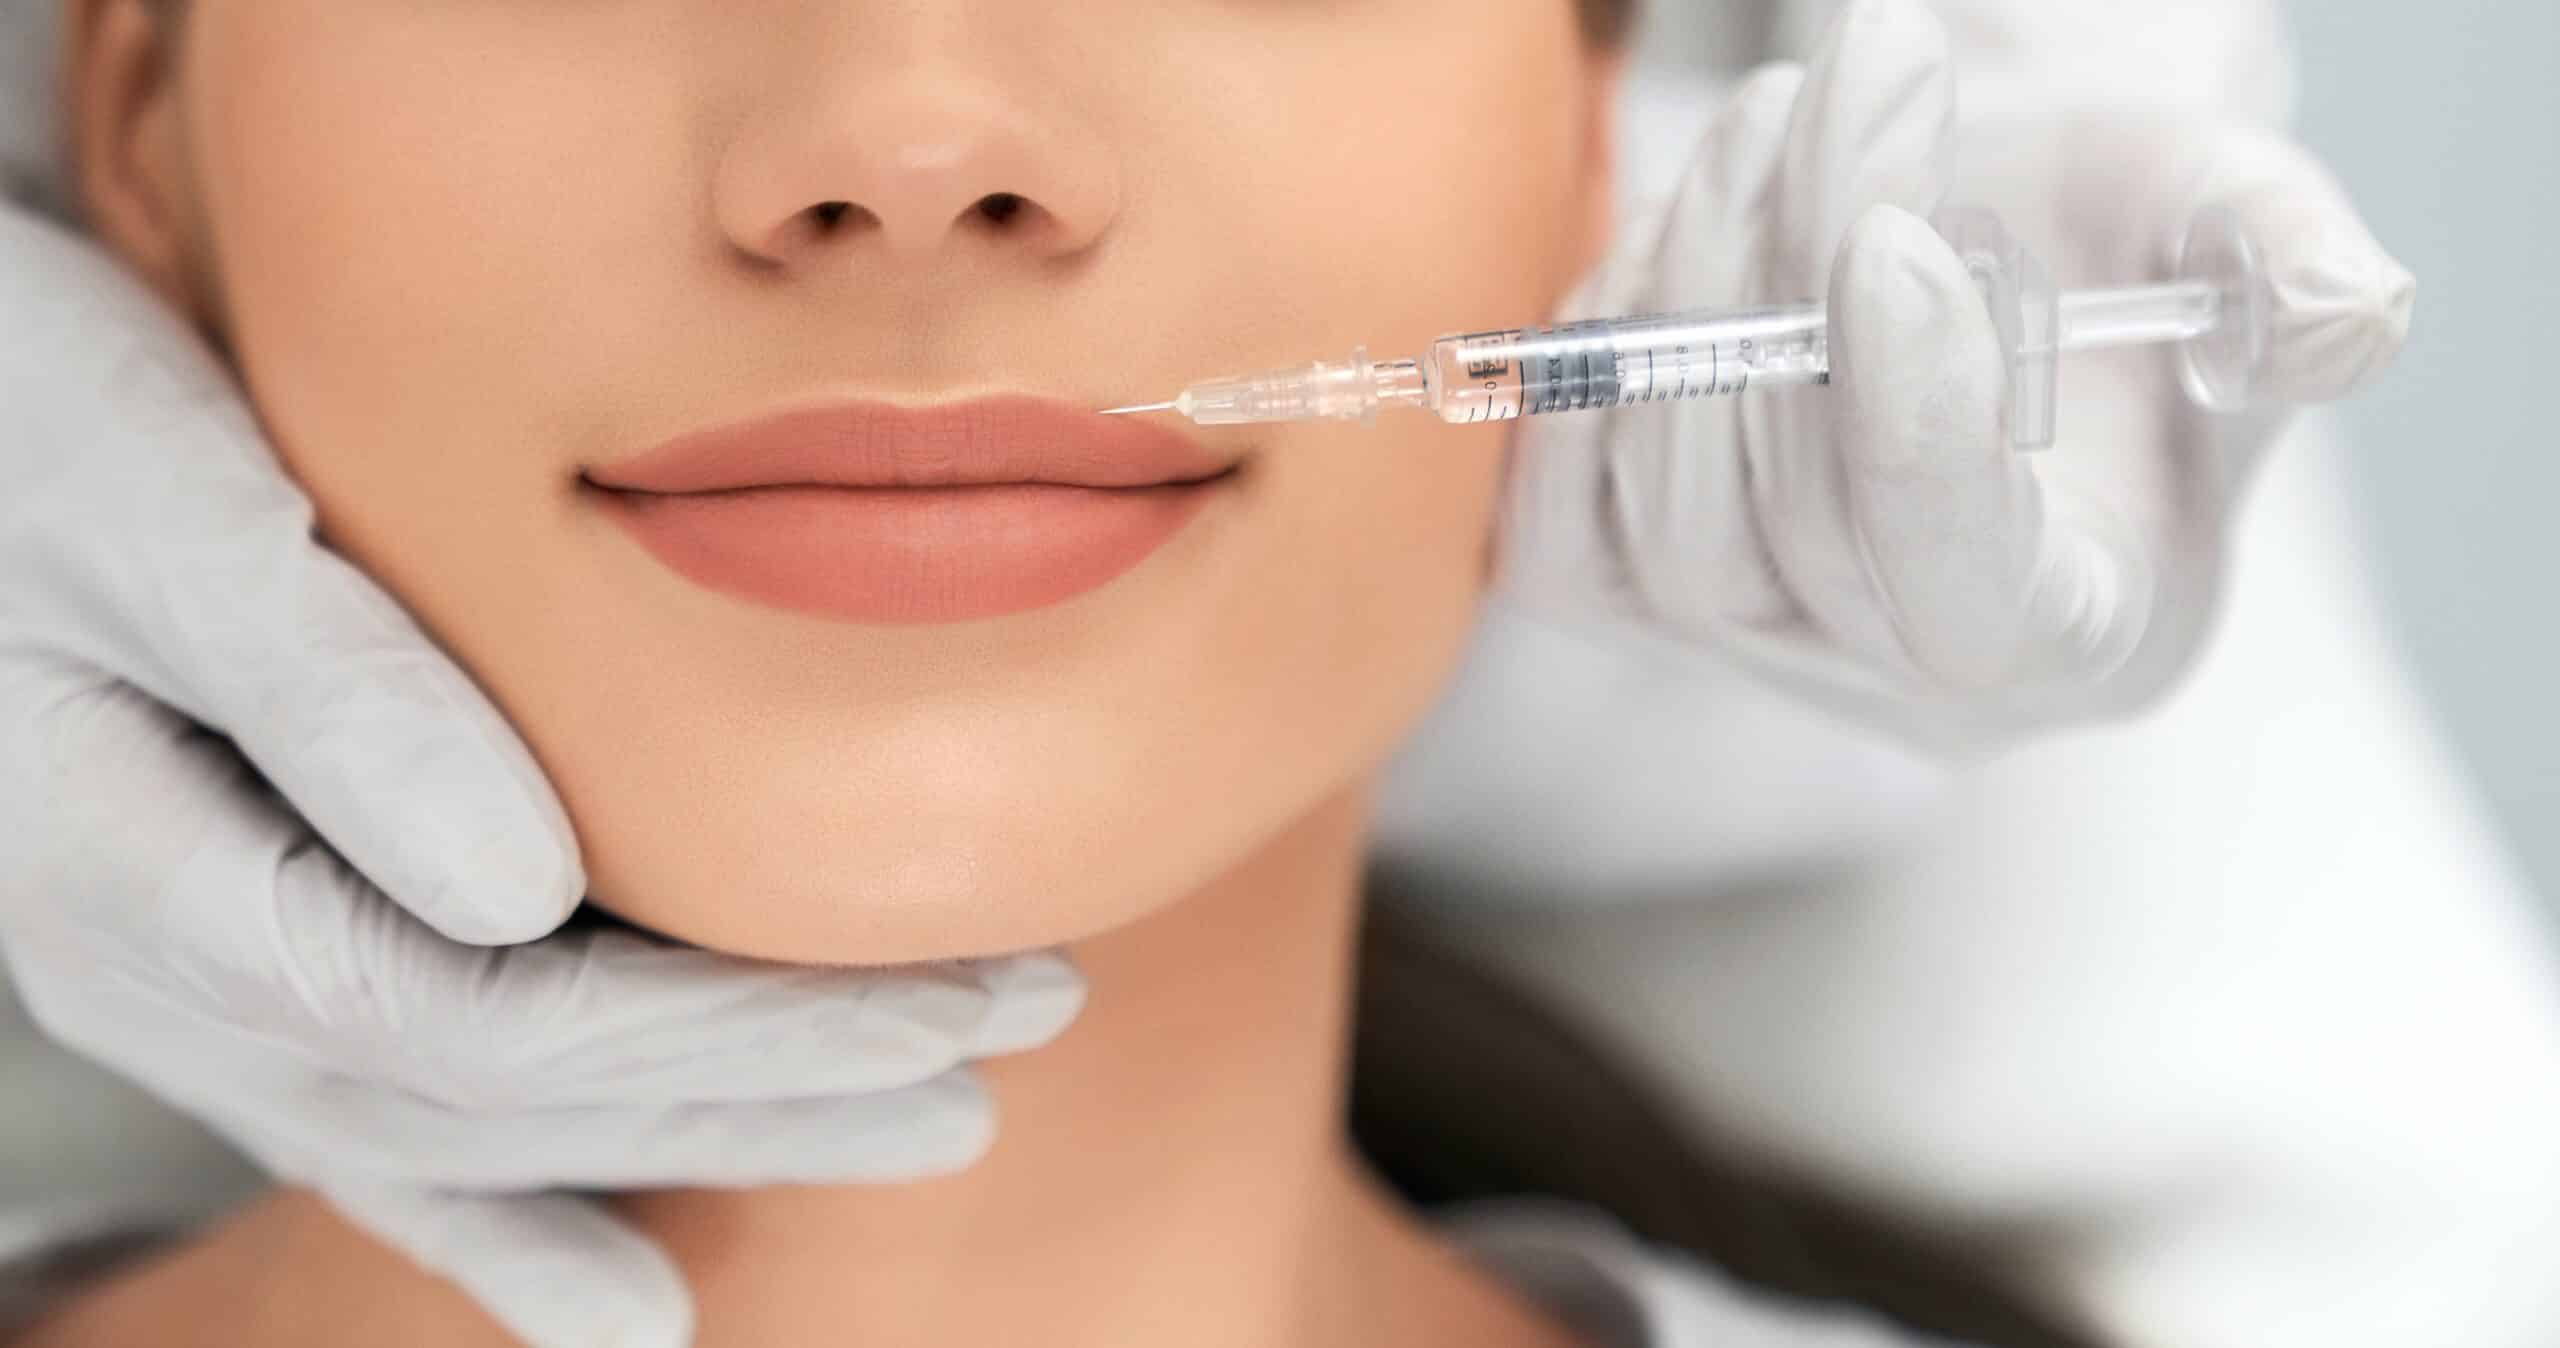 Lip fillers 101: What to expect during a lip filler procedure